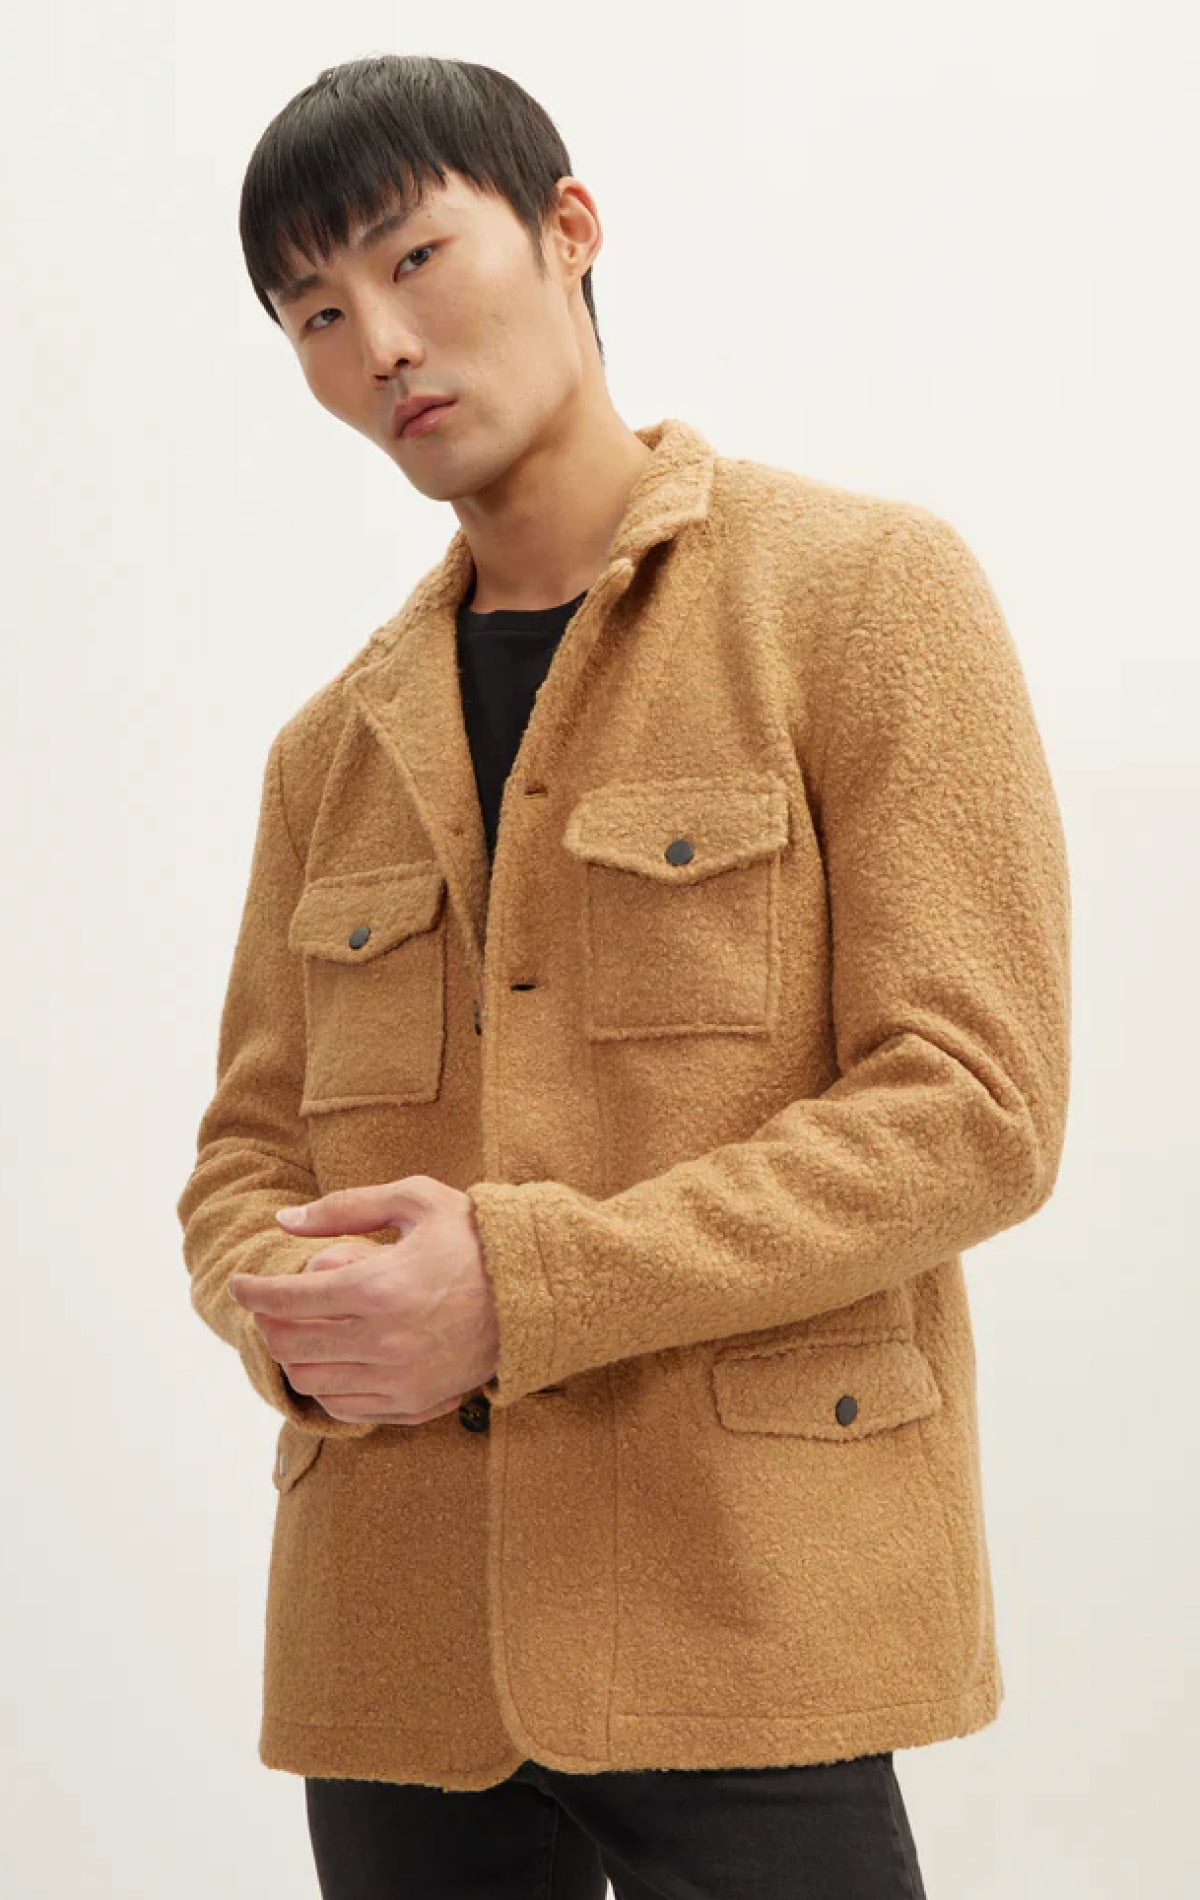 Camel overshirt boasts a faux teddy material and oversized fit, complete with a soft lining, and chest pockets.